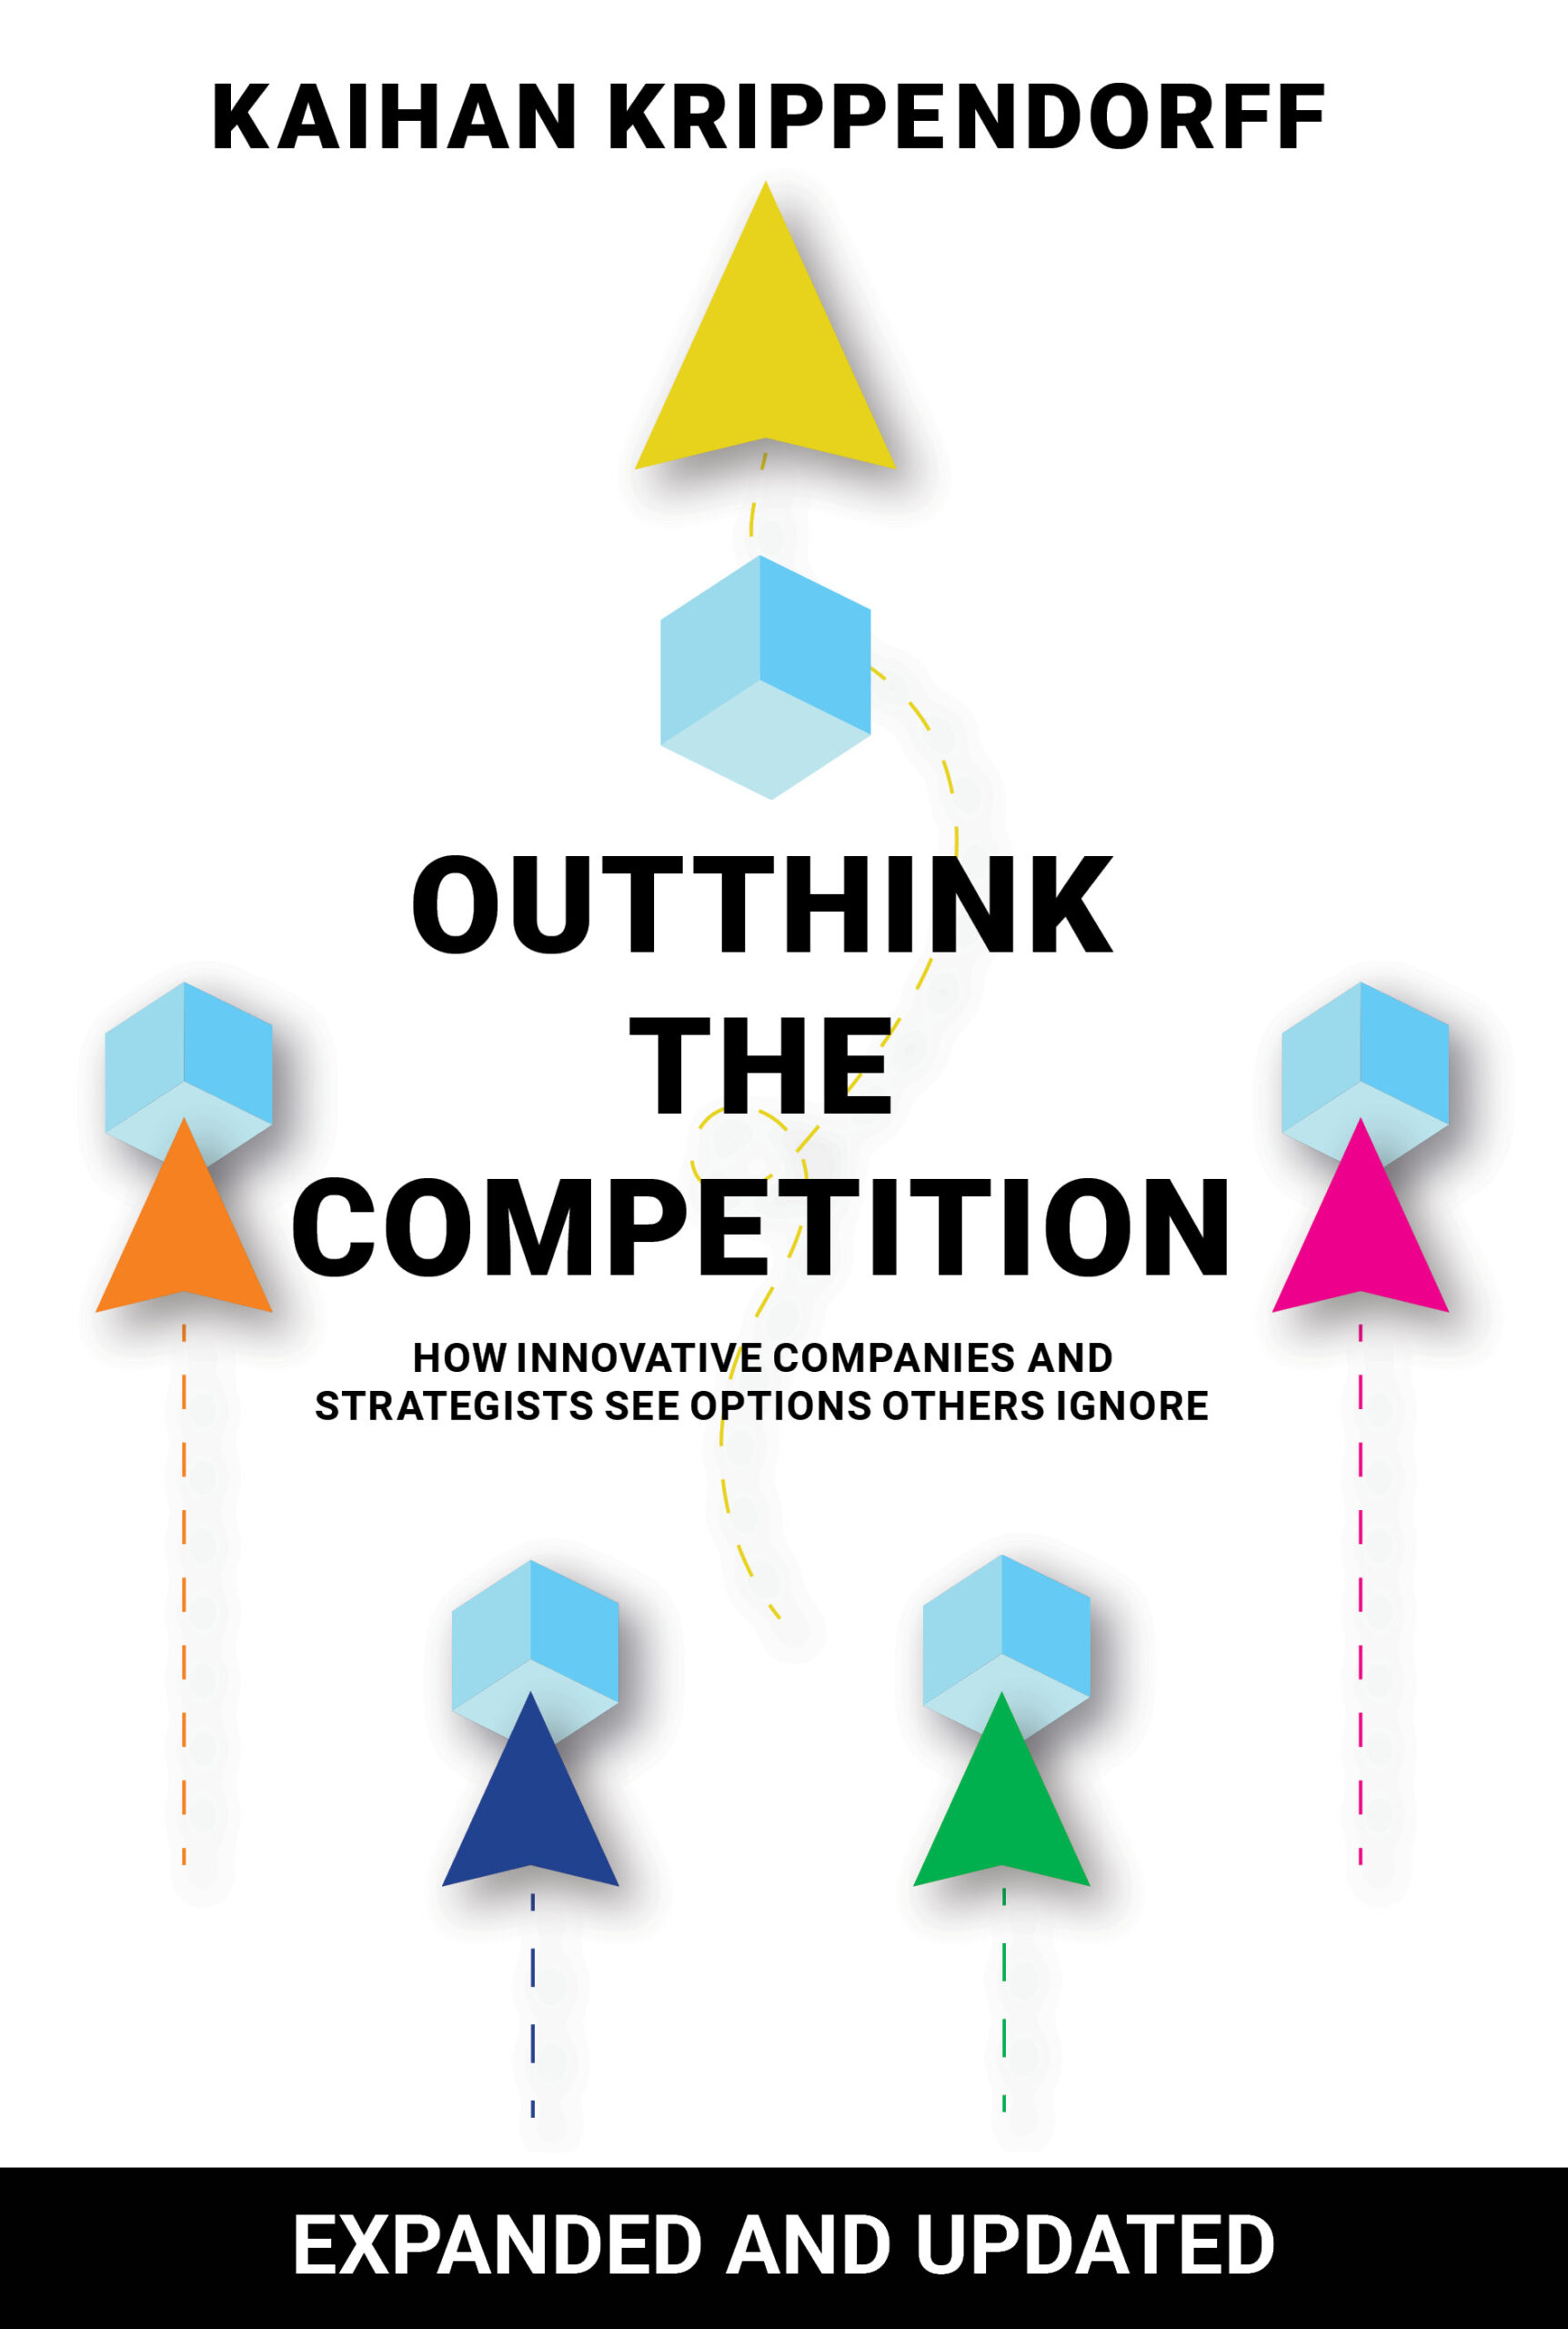 Outthinkthecompetition cover sb scaled outthink the competition: how a new generation of strategists sees options others ignore